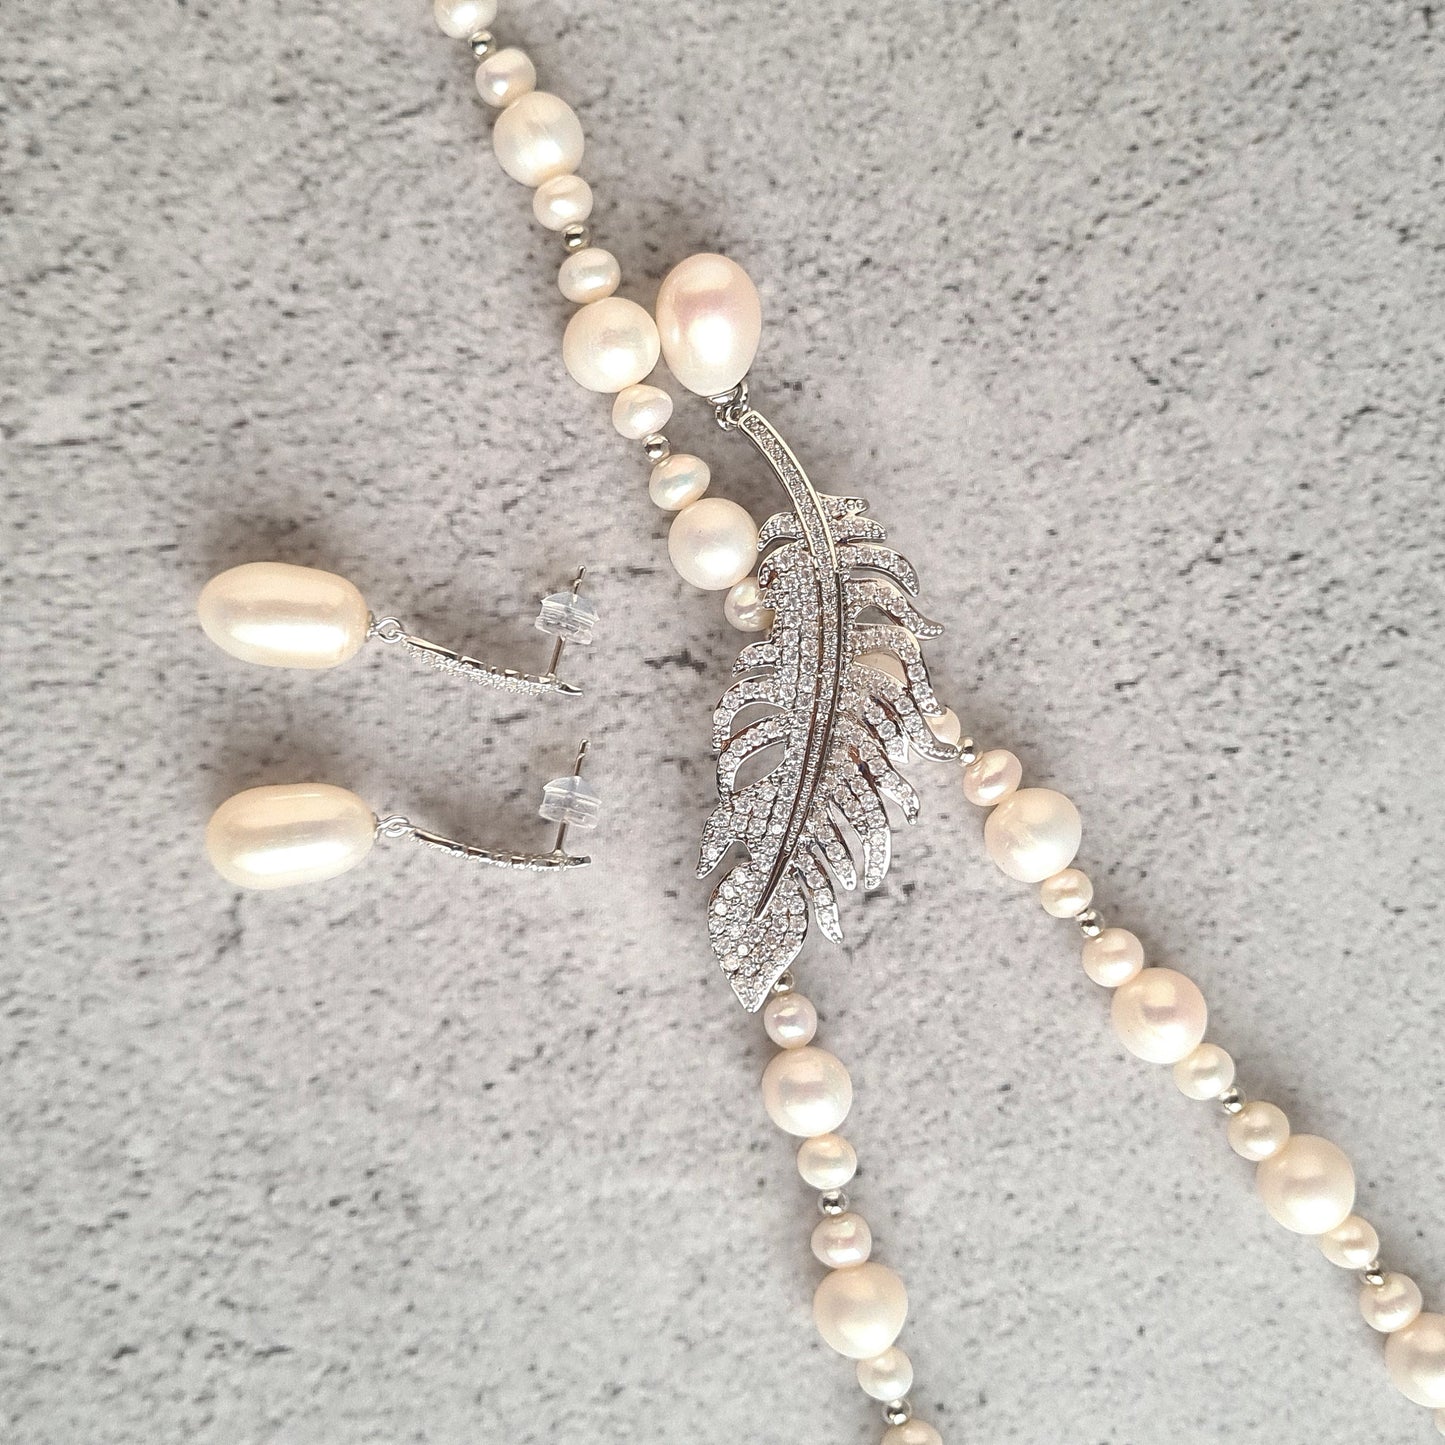 Fresh Water Pearl Lariat Necklace with feather Clasp & Feather Stud Earrings Set